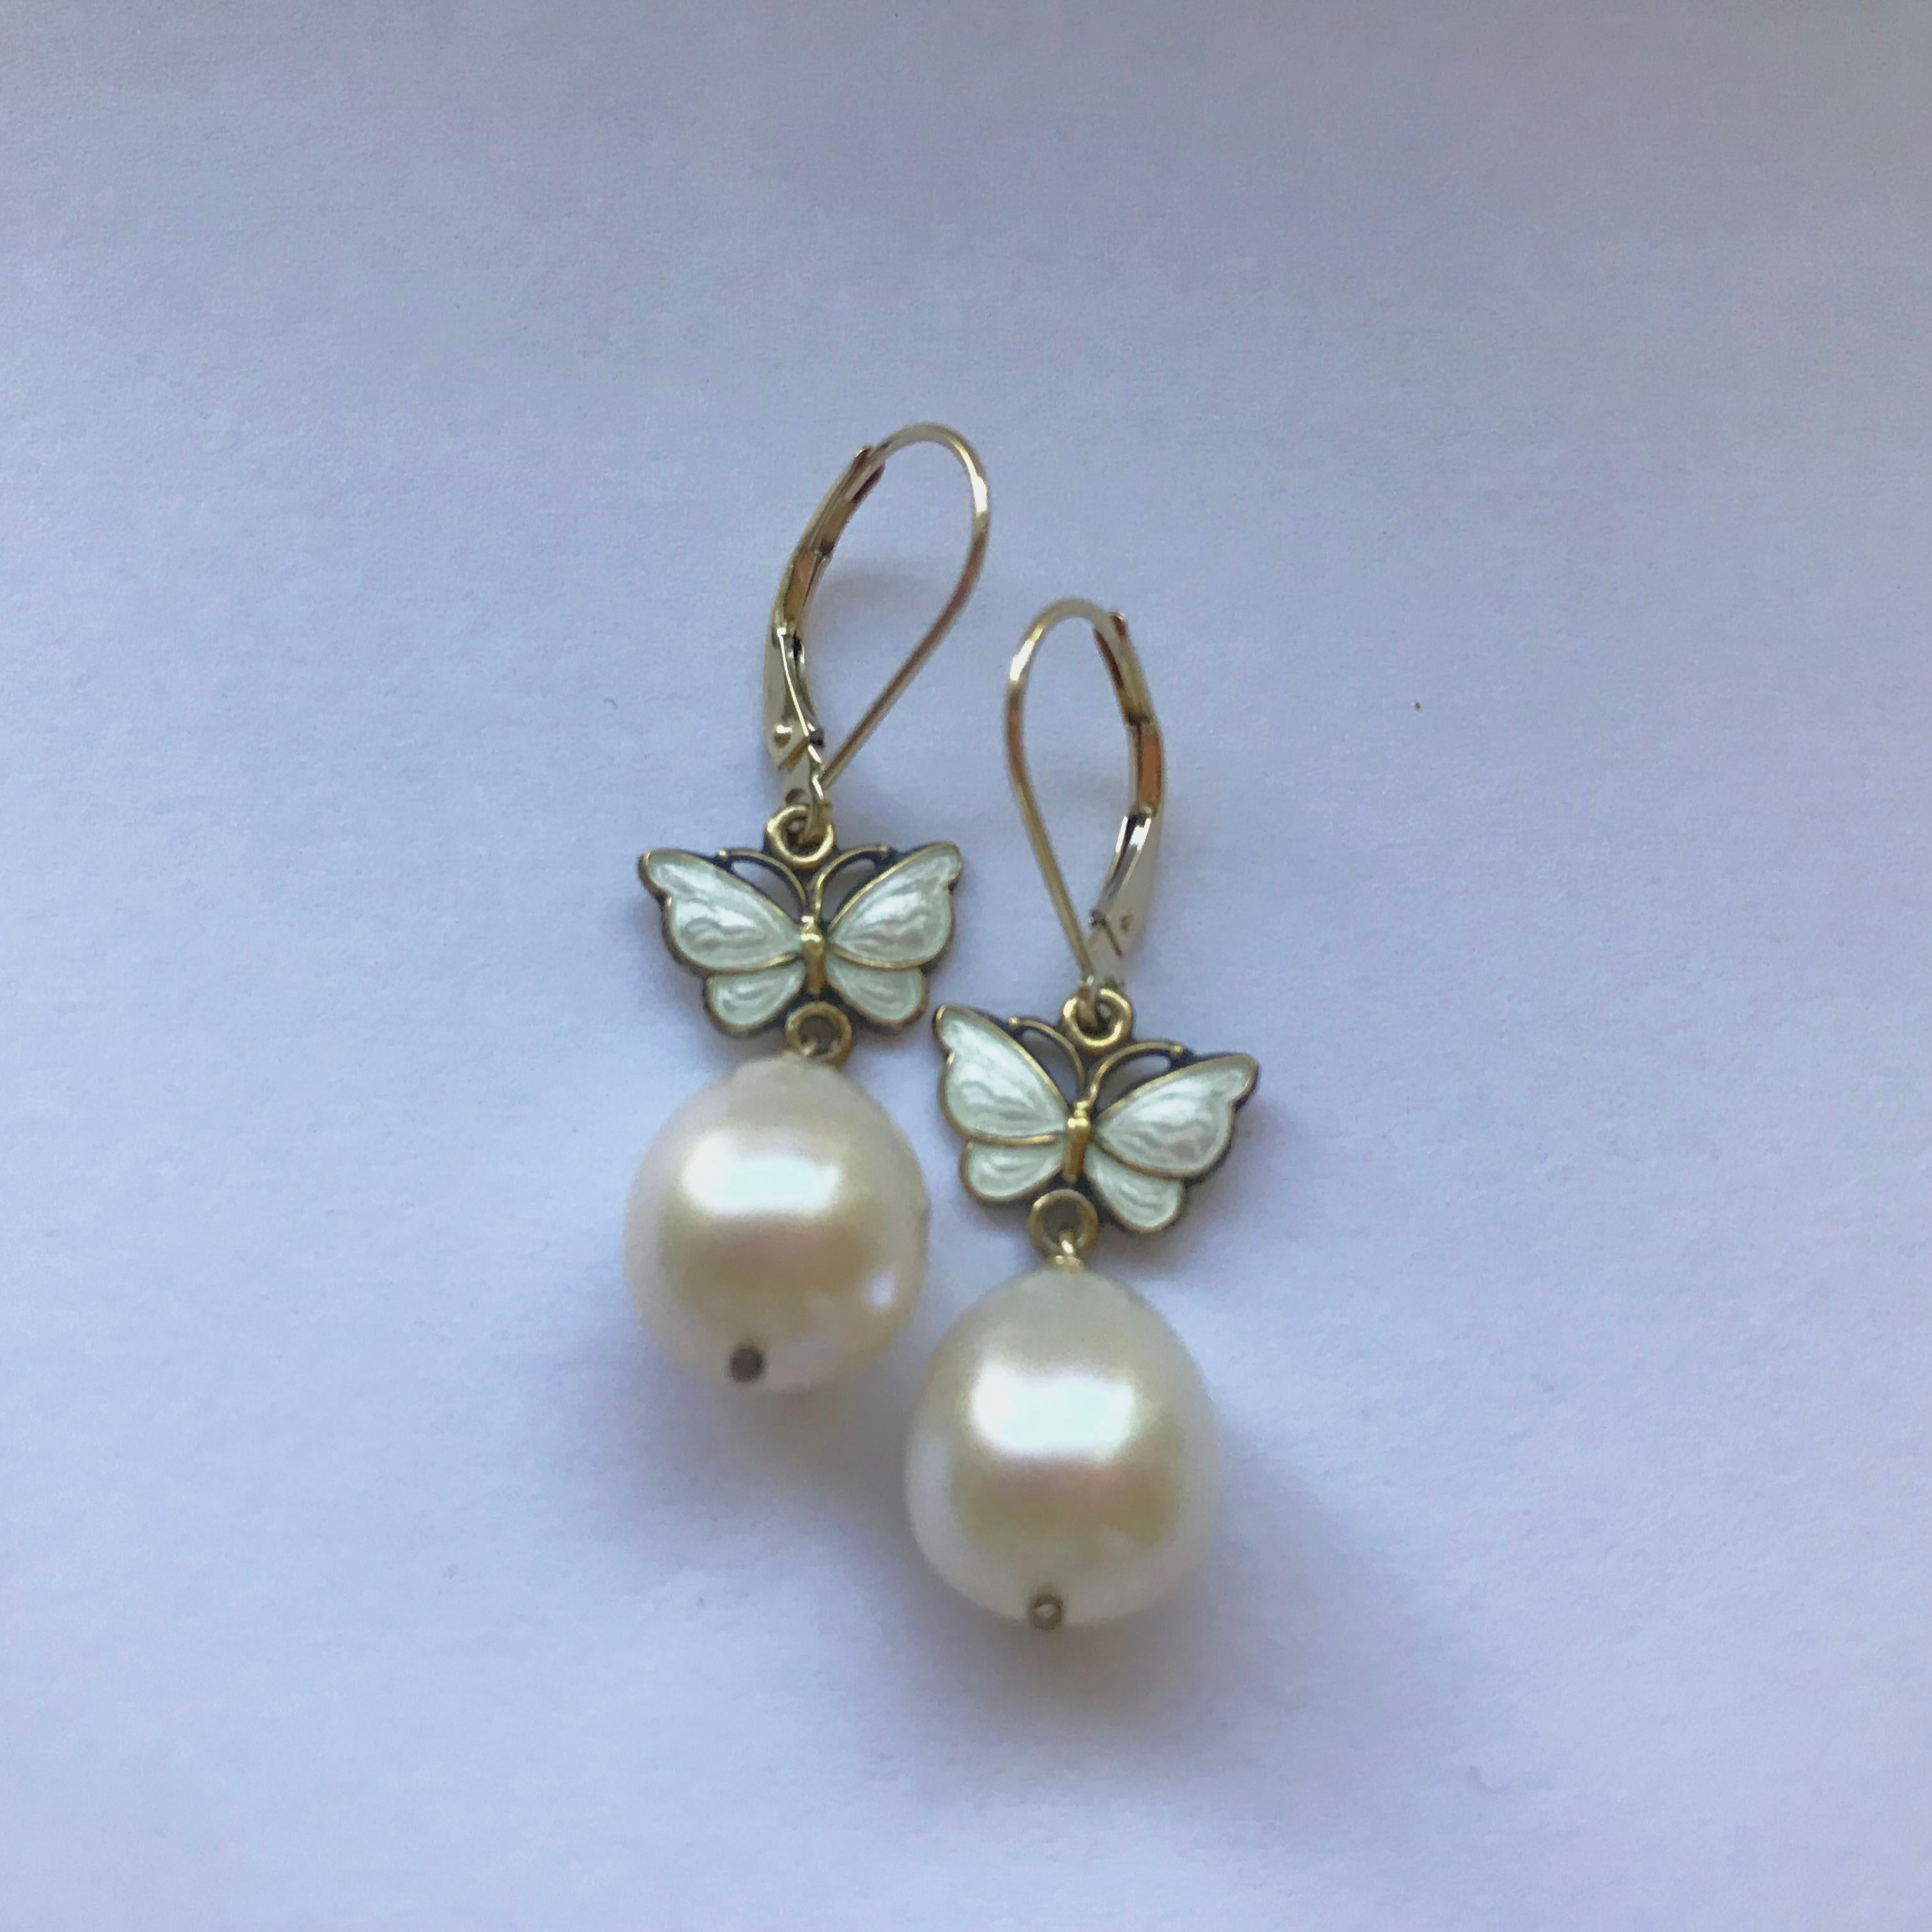 These earrings are perfect for a beautiful winter day out. A vintage butterfly (c.1950s) with fine white enamel hangs from a 14k yellow gold earring and finished with a large drop-shaped pearl. The earrings hang 1.5 inches in length, highlighting